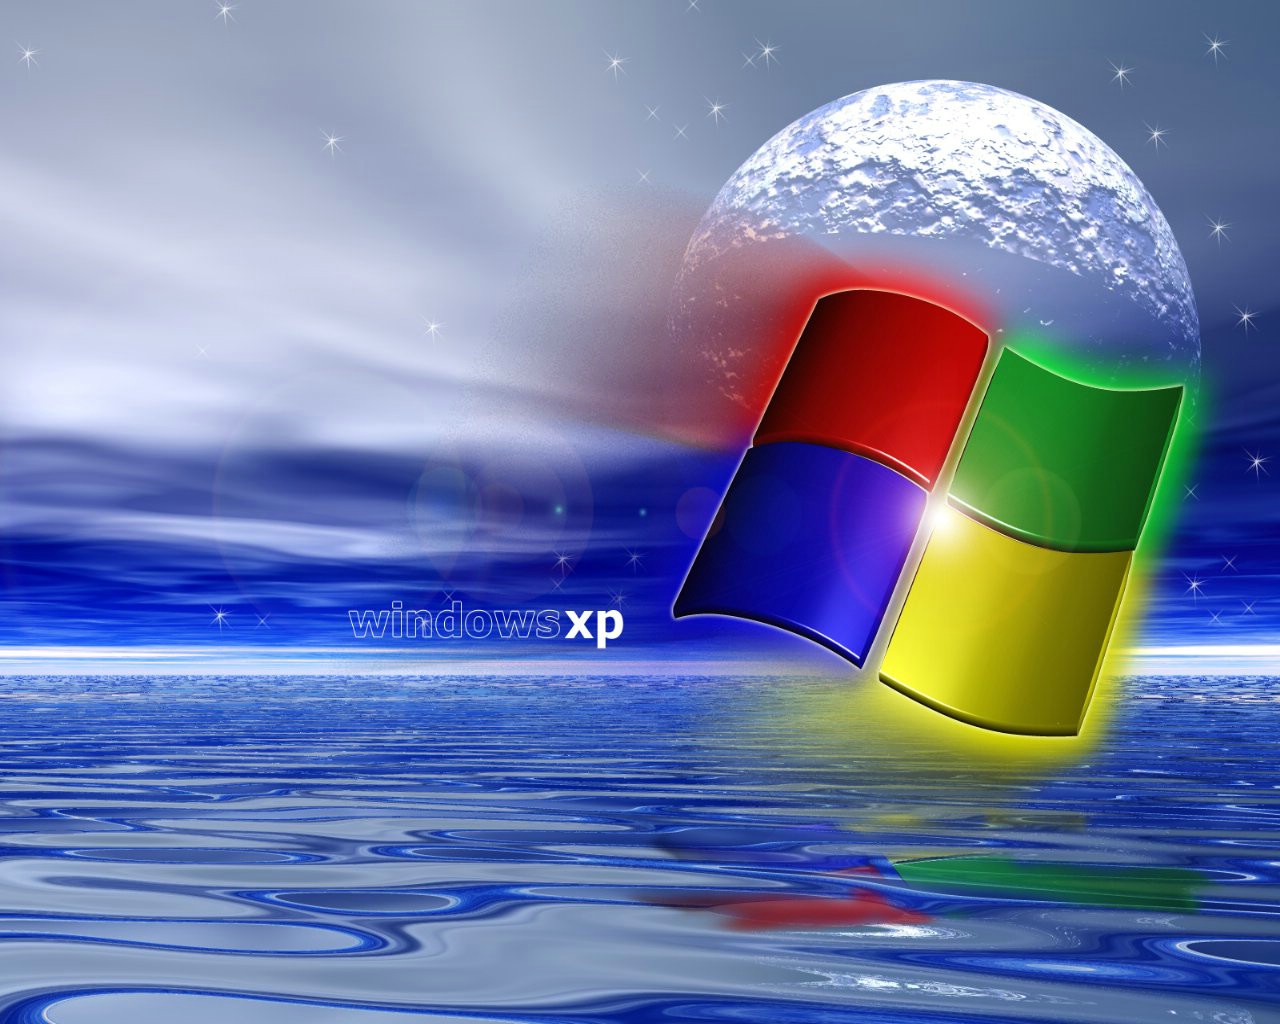 XMWallpapers.com wallpaper computer generated os themes windows xp